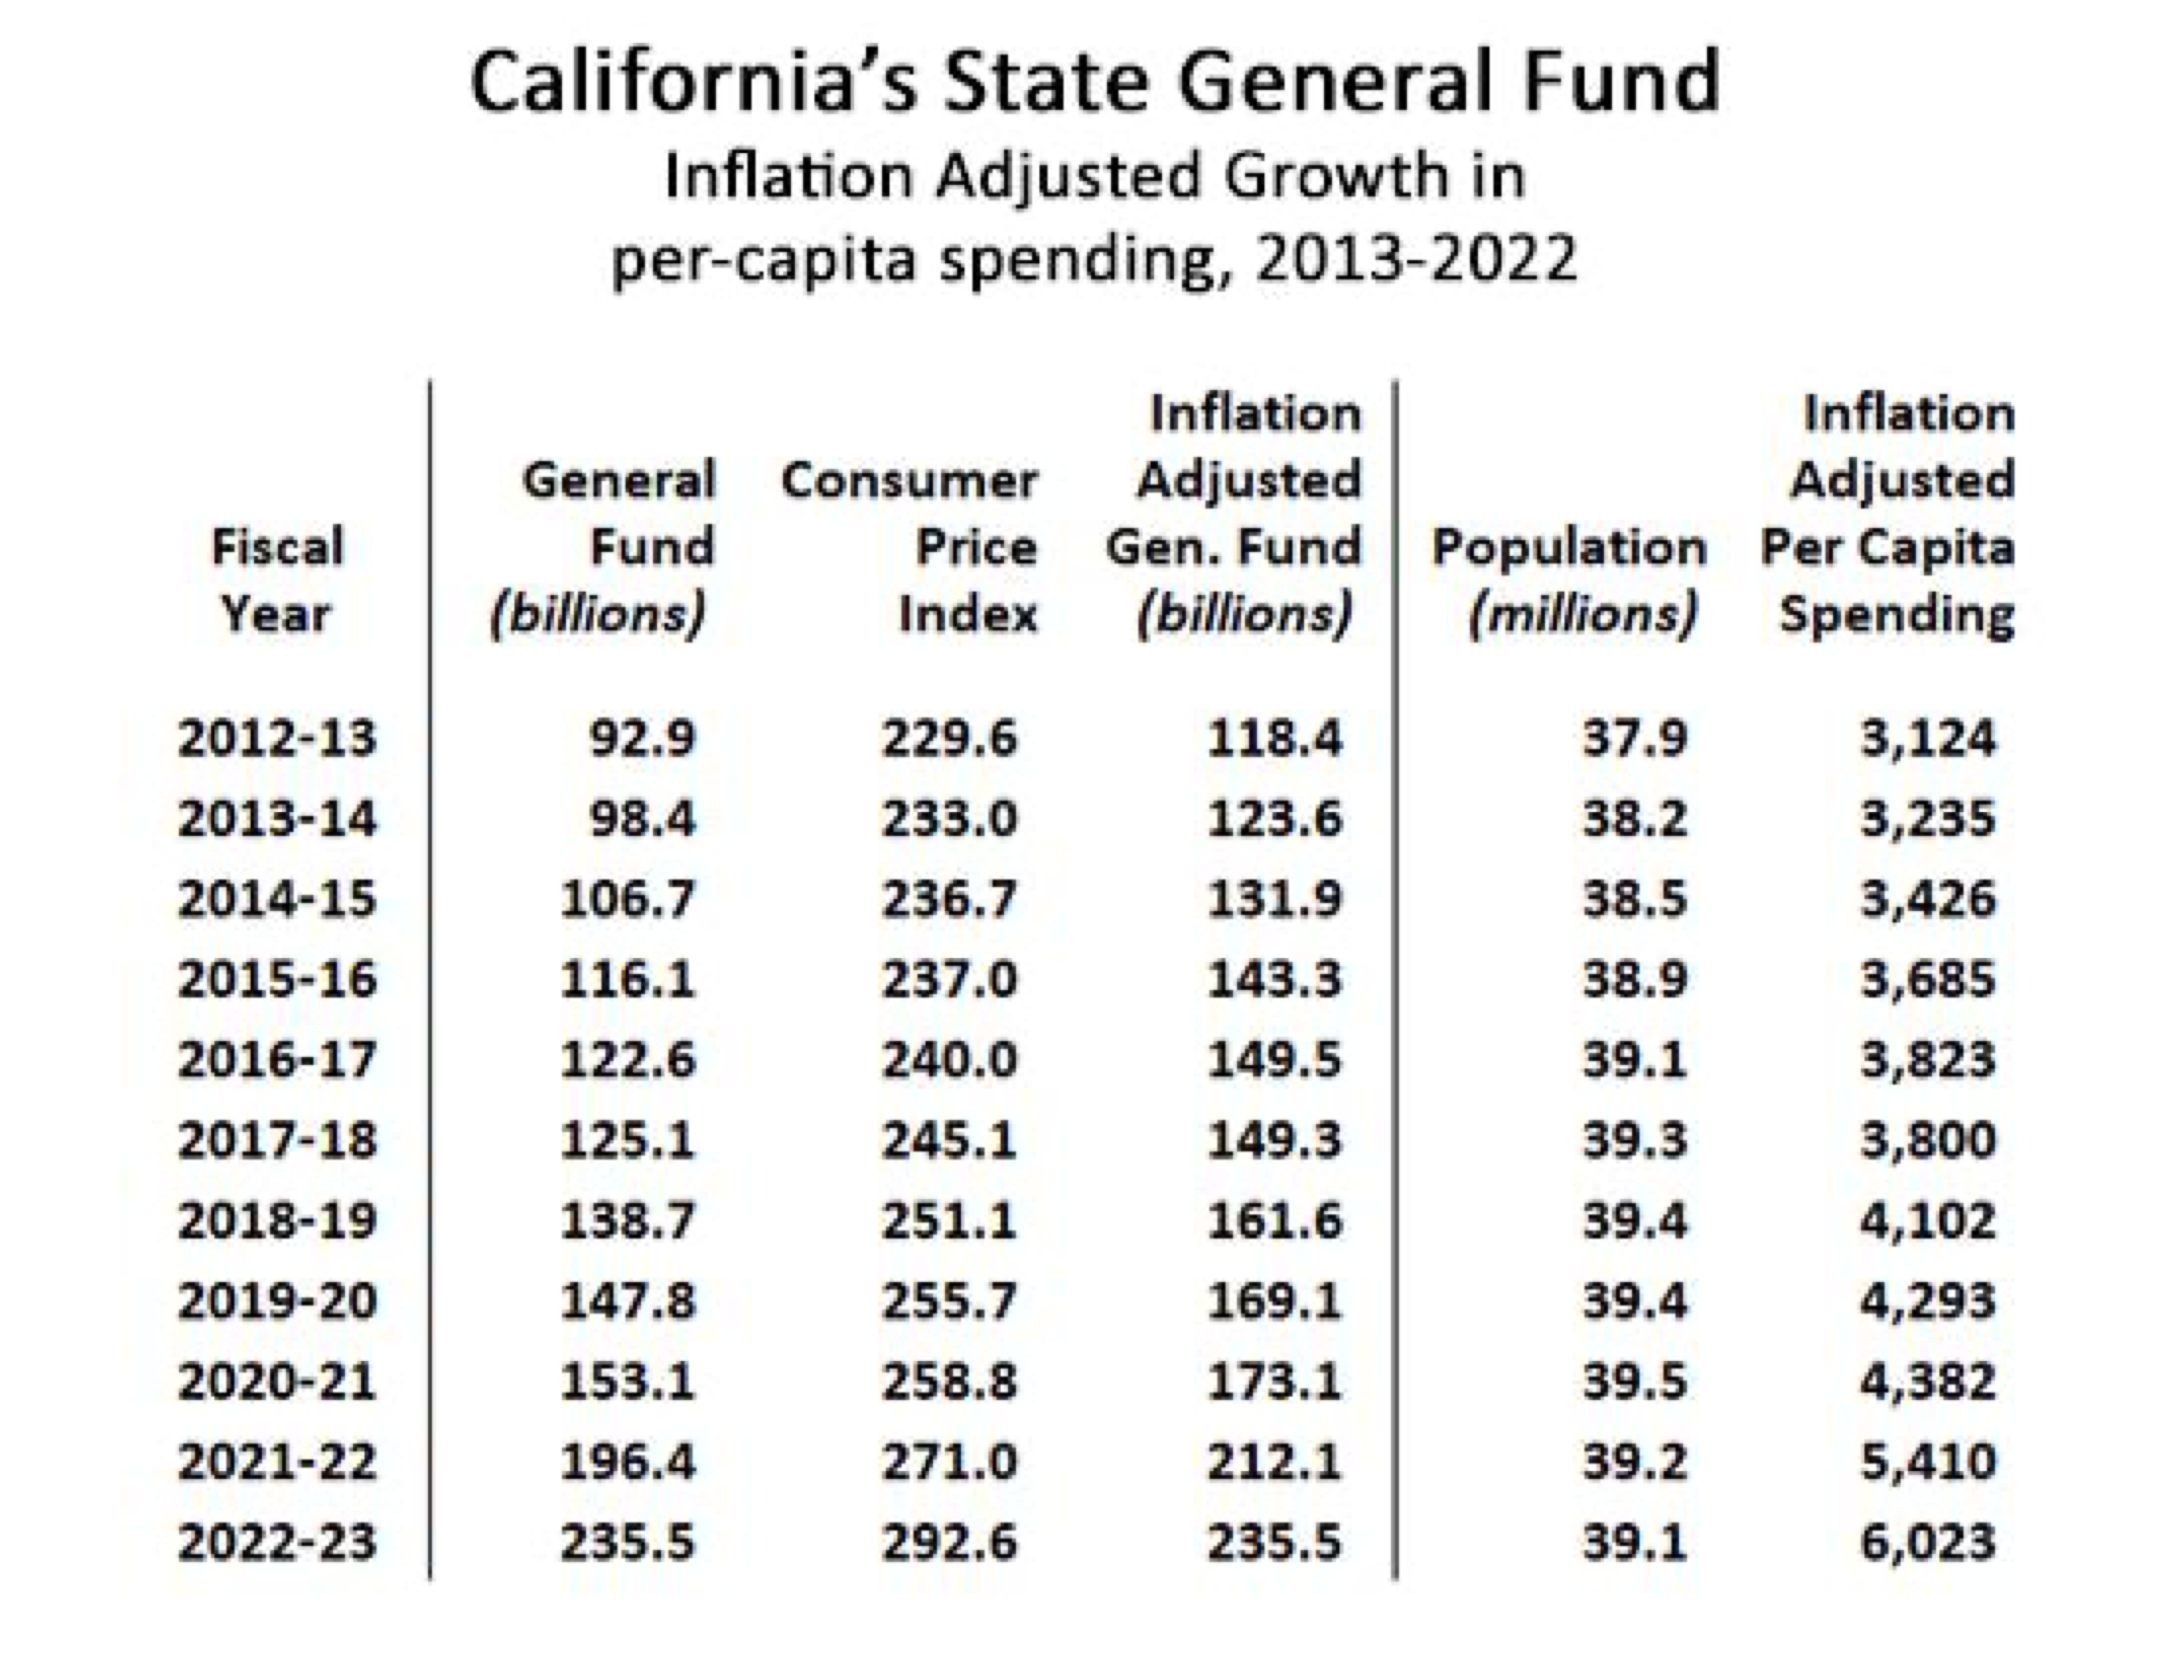 A Chart of California's General Fund. The Chart shows inflation-adjusted per capita spending for California increase from ,124 in the 2012-2013 fiscal year to ,023 in the 2022-23 fiscal year.